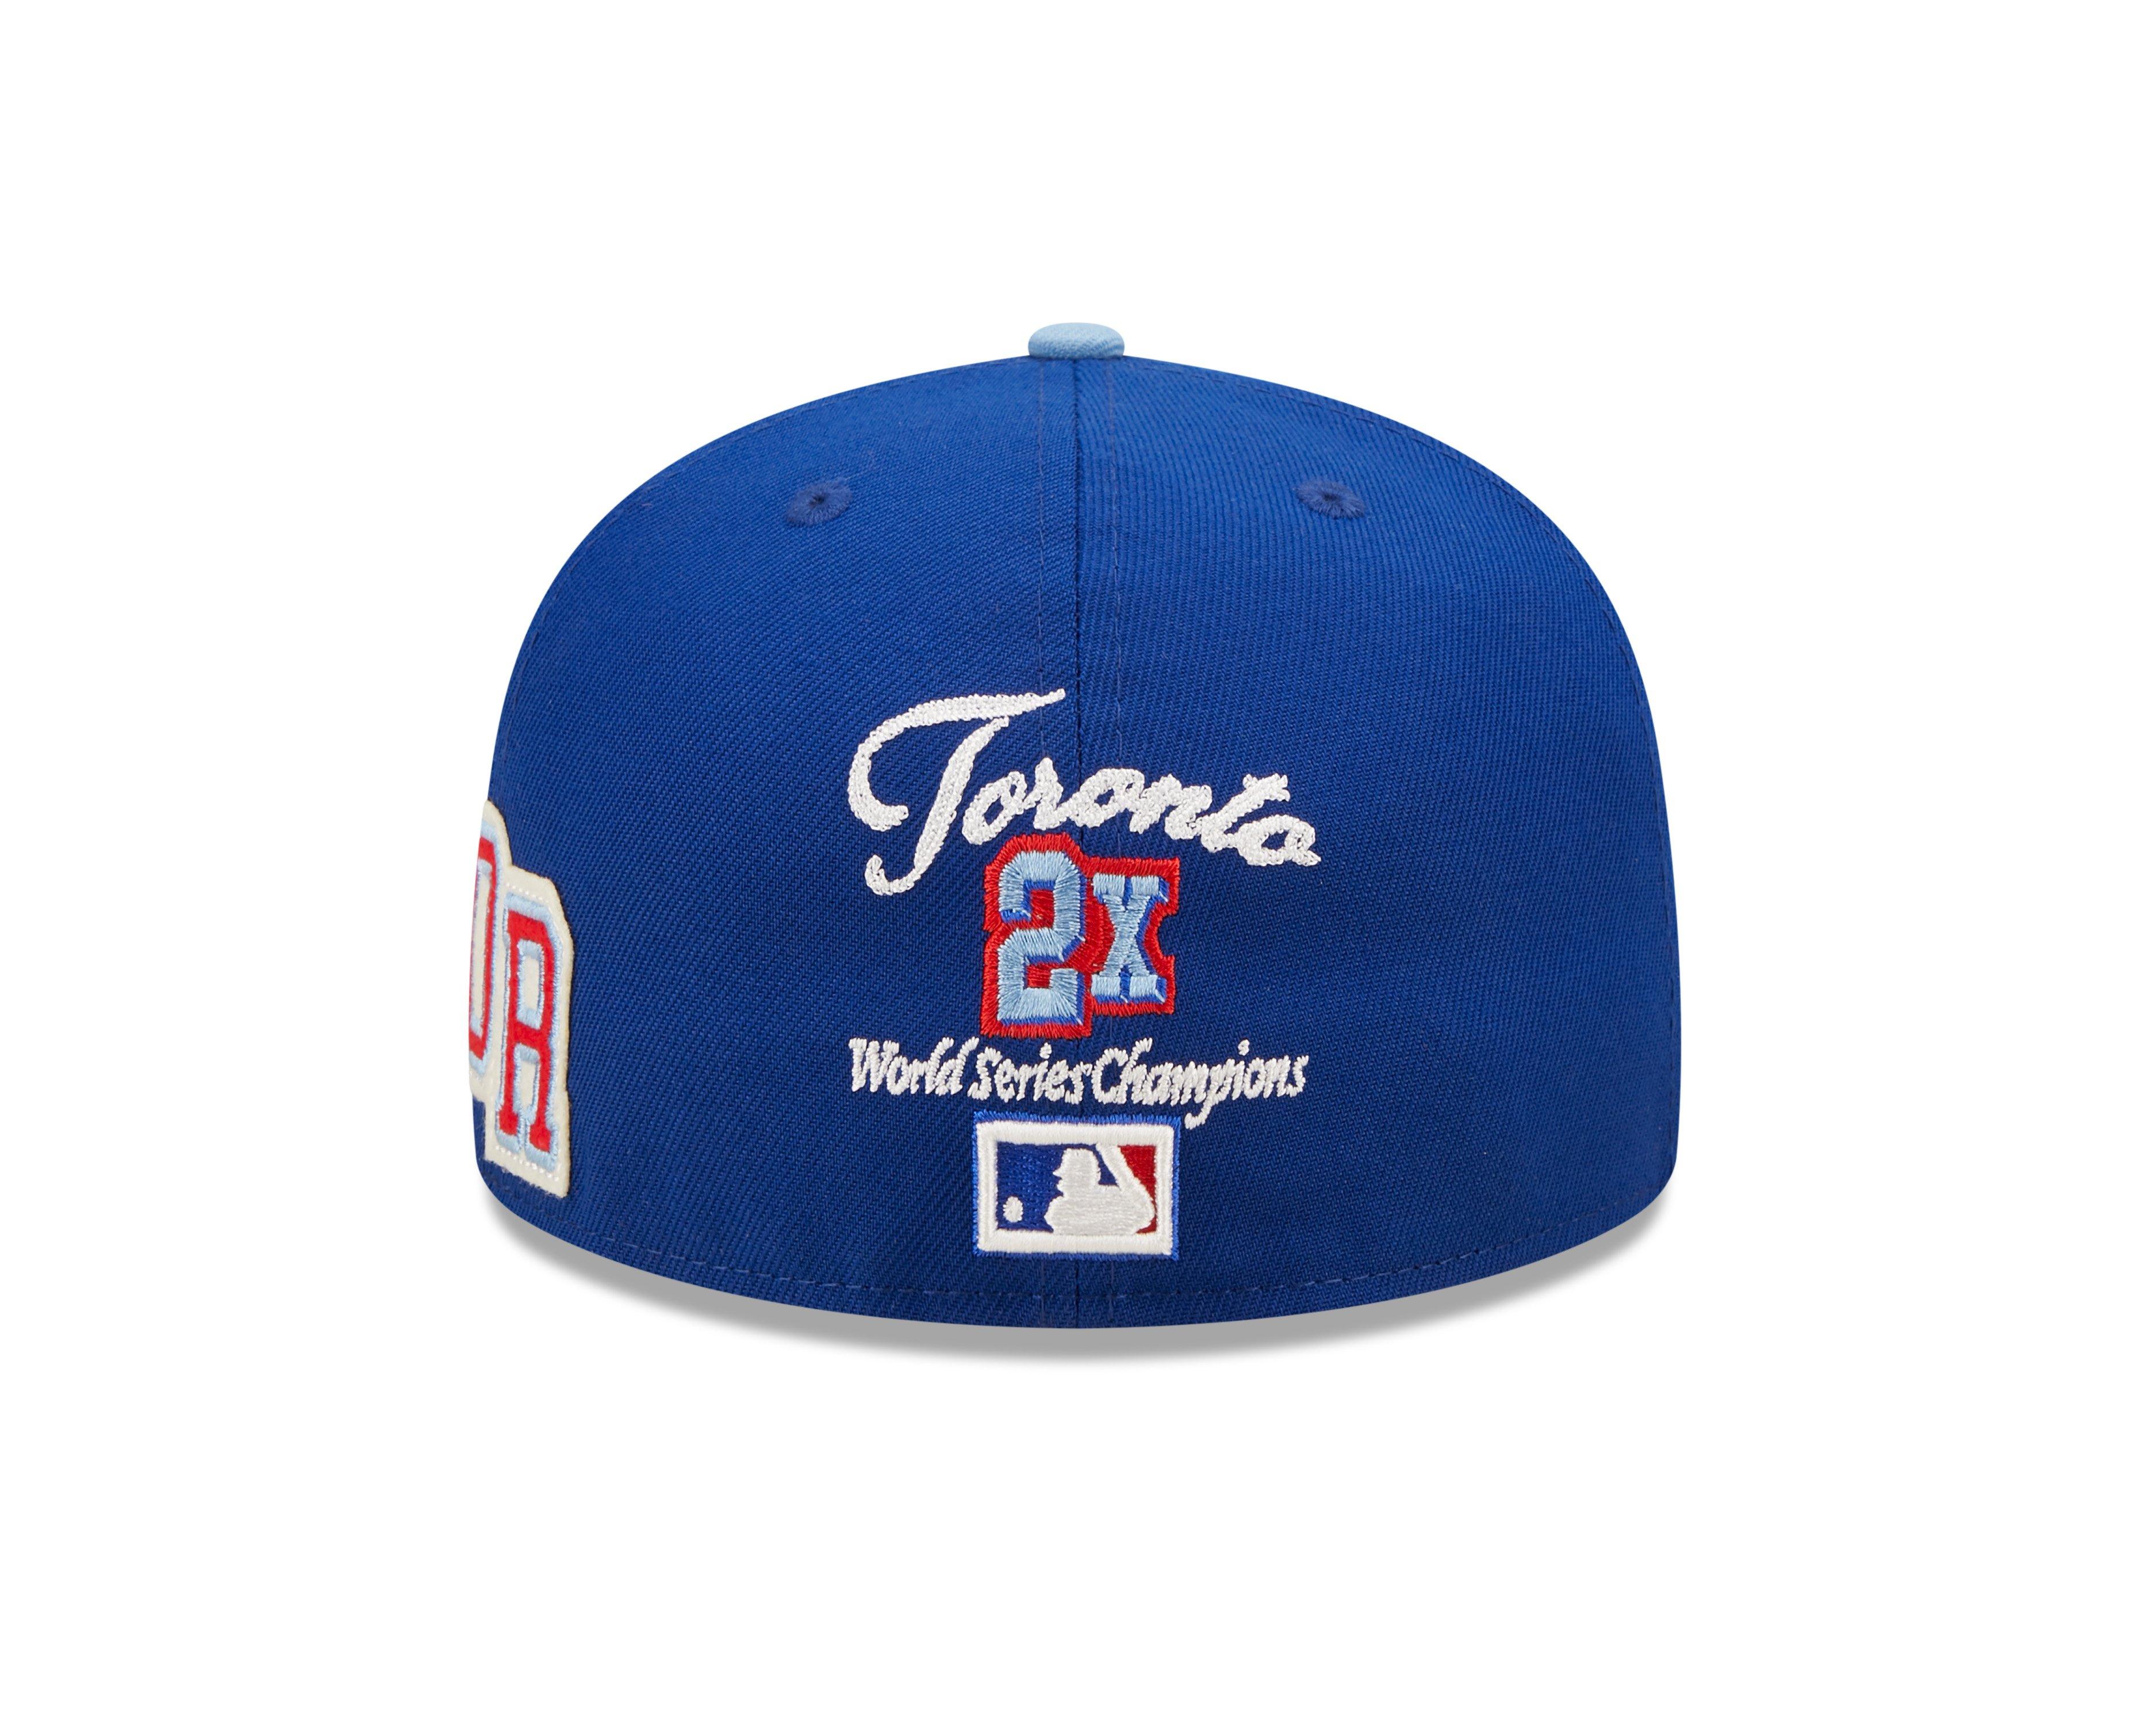 Men's New Era Tan Toronto Blue Jays 10th Anniversary Sky Undervisor 59FIFTY Fitted Hat